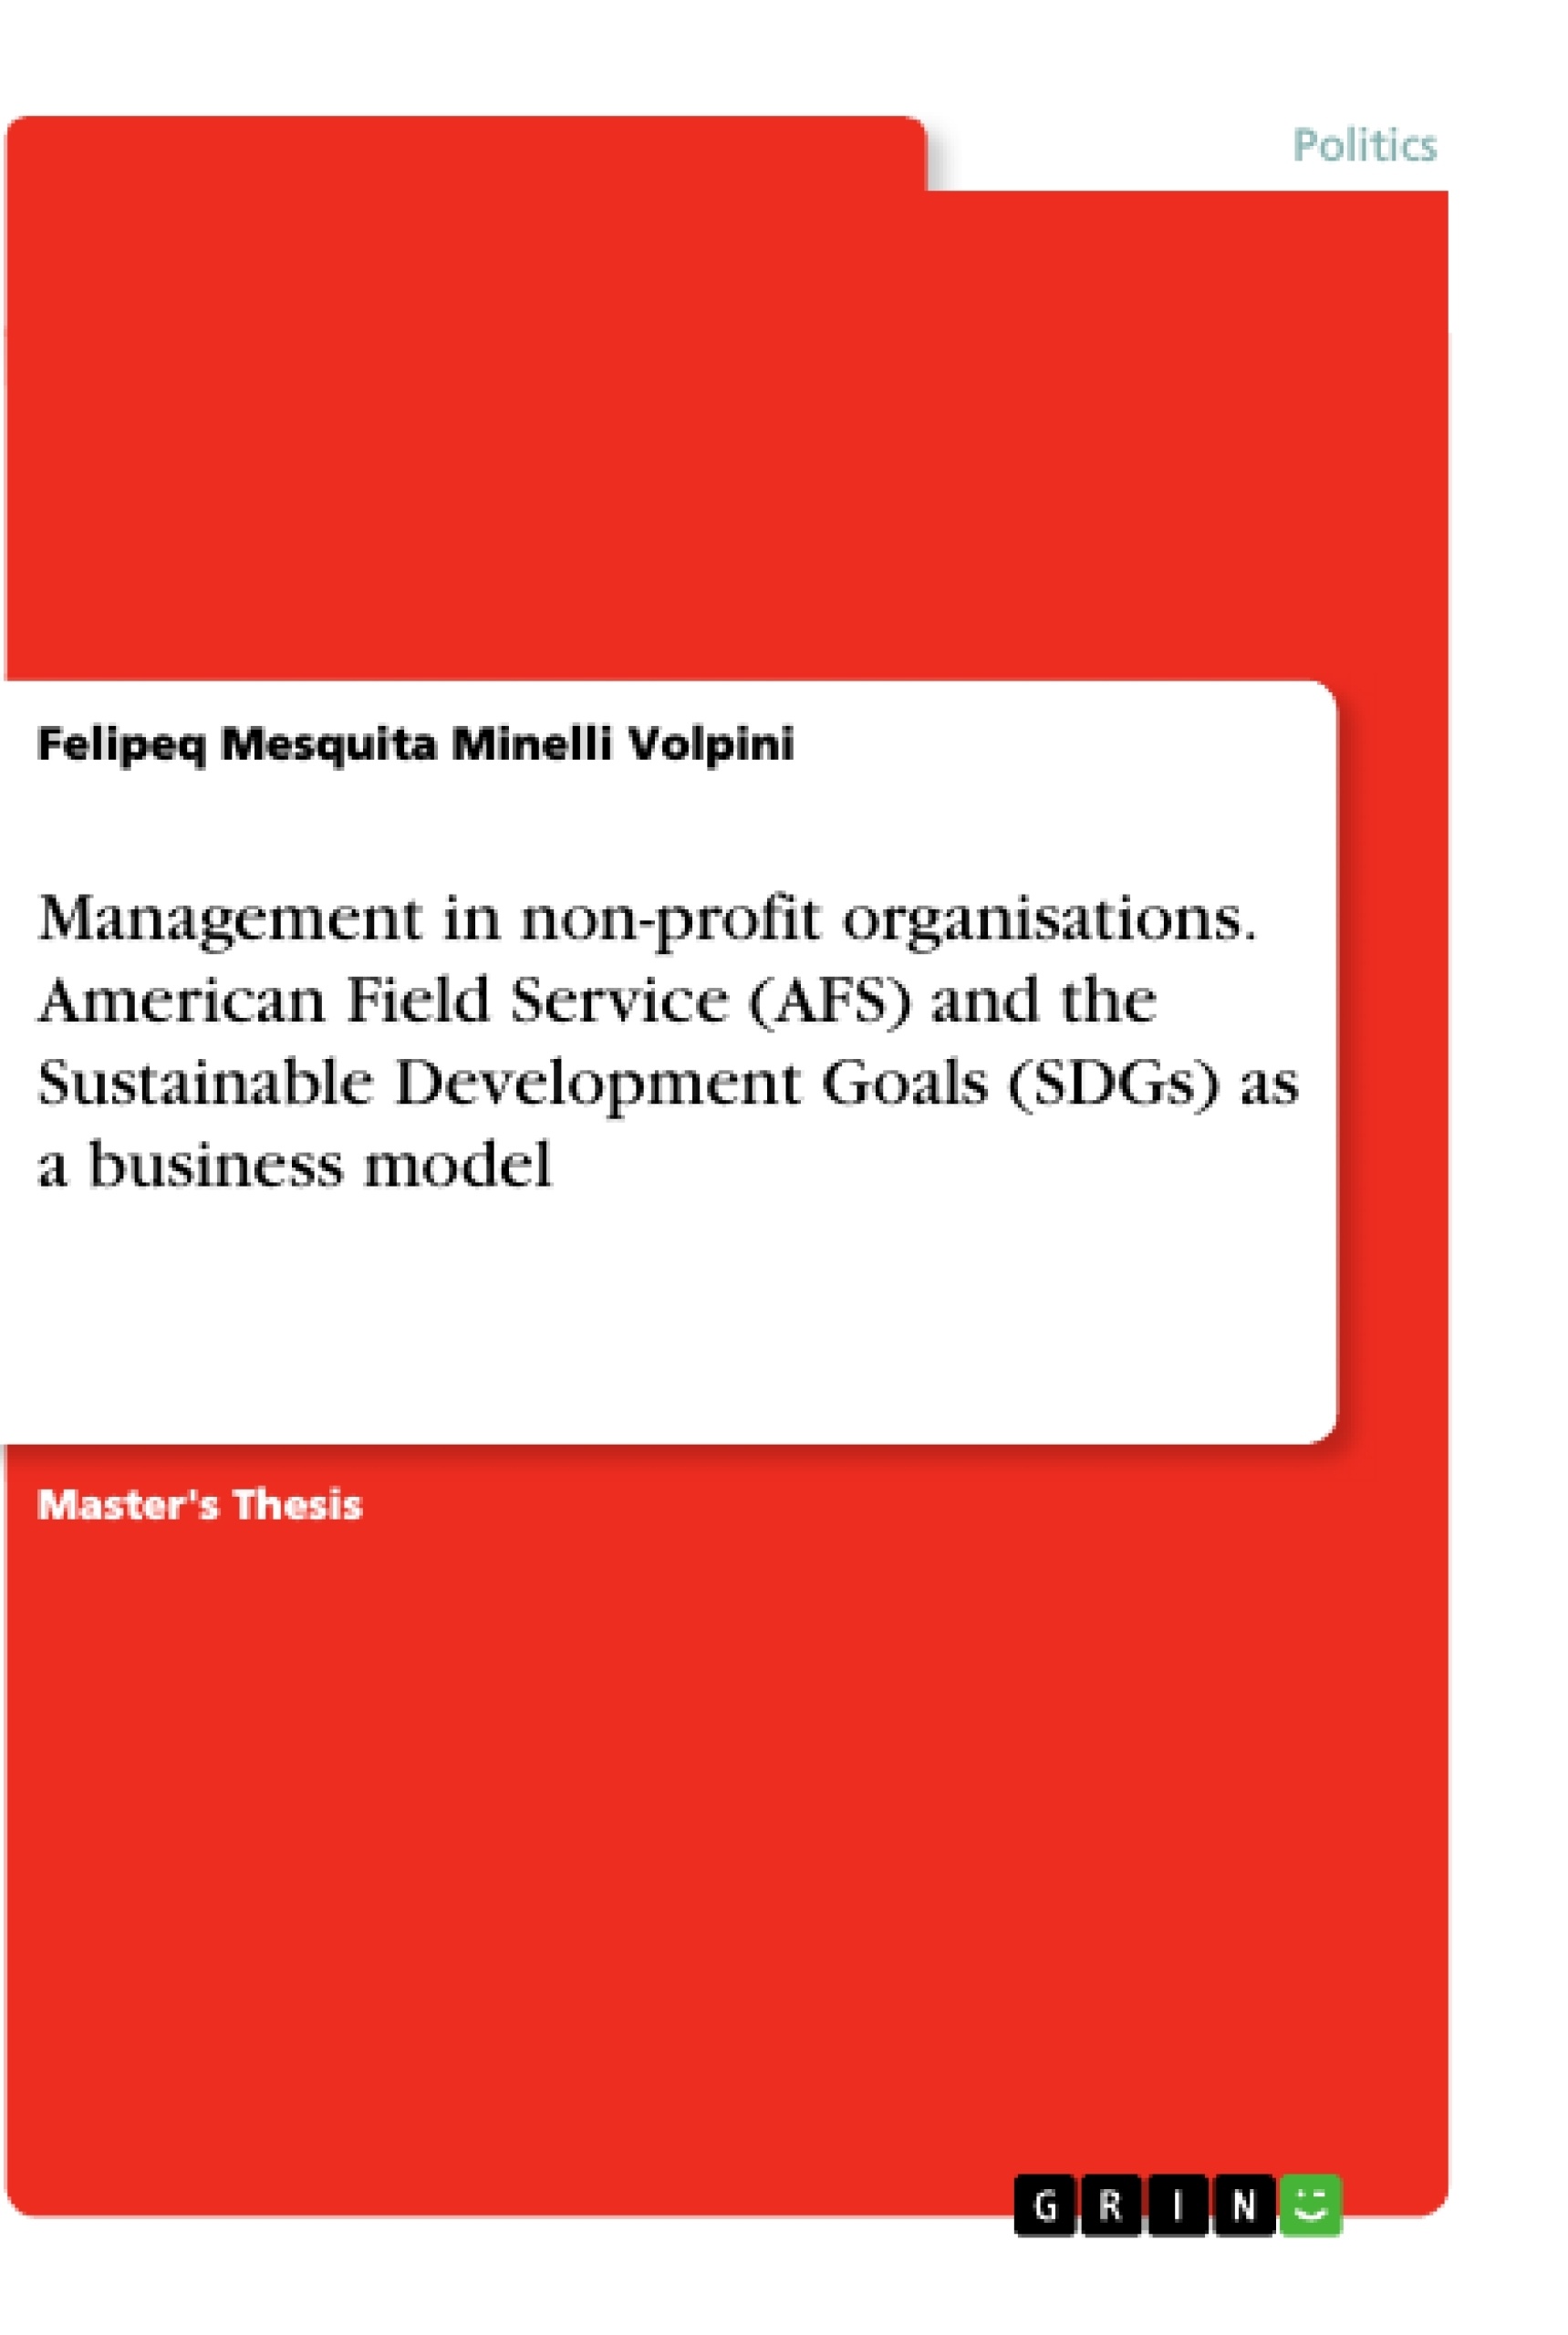 Title: Management in non-profit organisations. American Field Service (AFS) and the Sustainable Development Goals (SDGs) as a business model